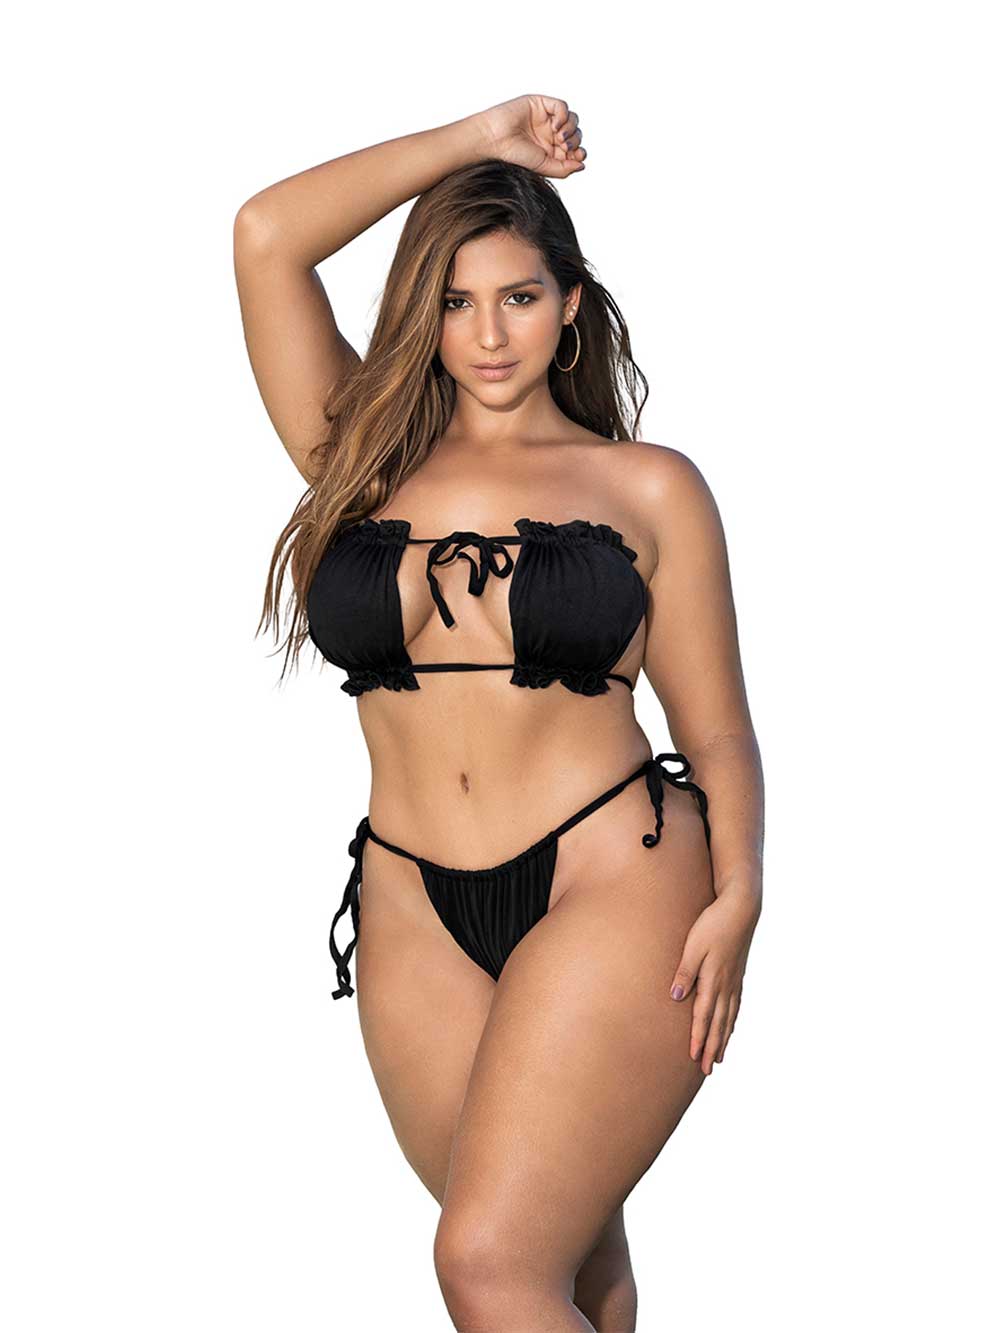 Mapale Two Piece Swimsuit 12X / Black 6603X Two Piece Swimsuit - Includes Strapless Top and Bottom